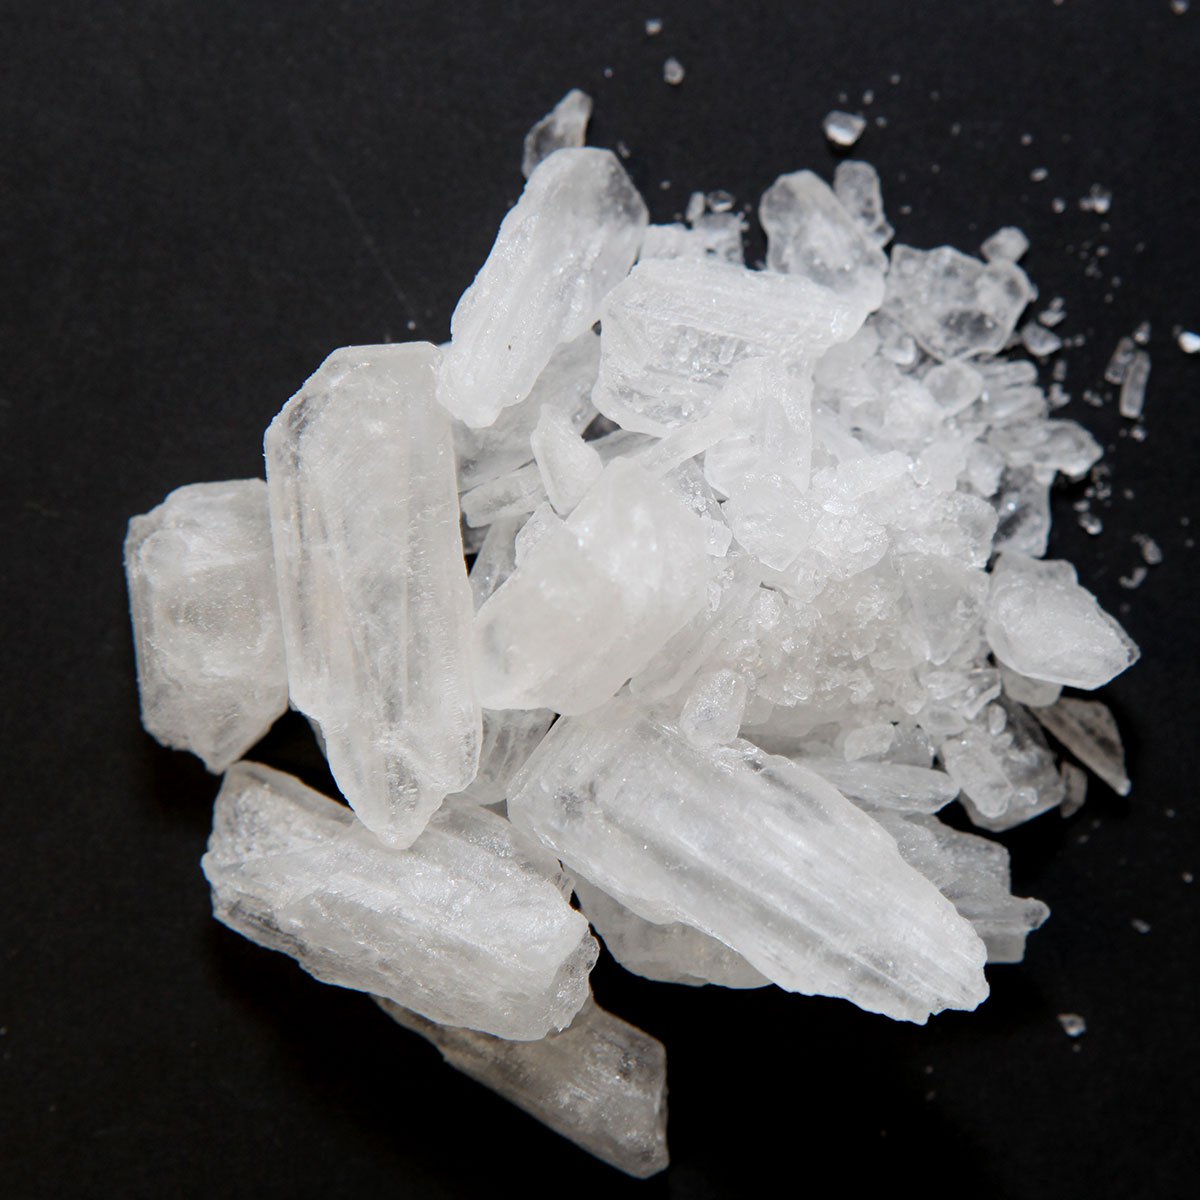 What Type of Drug is Ice?